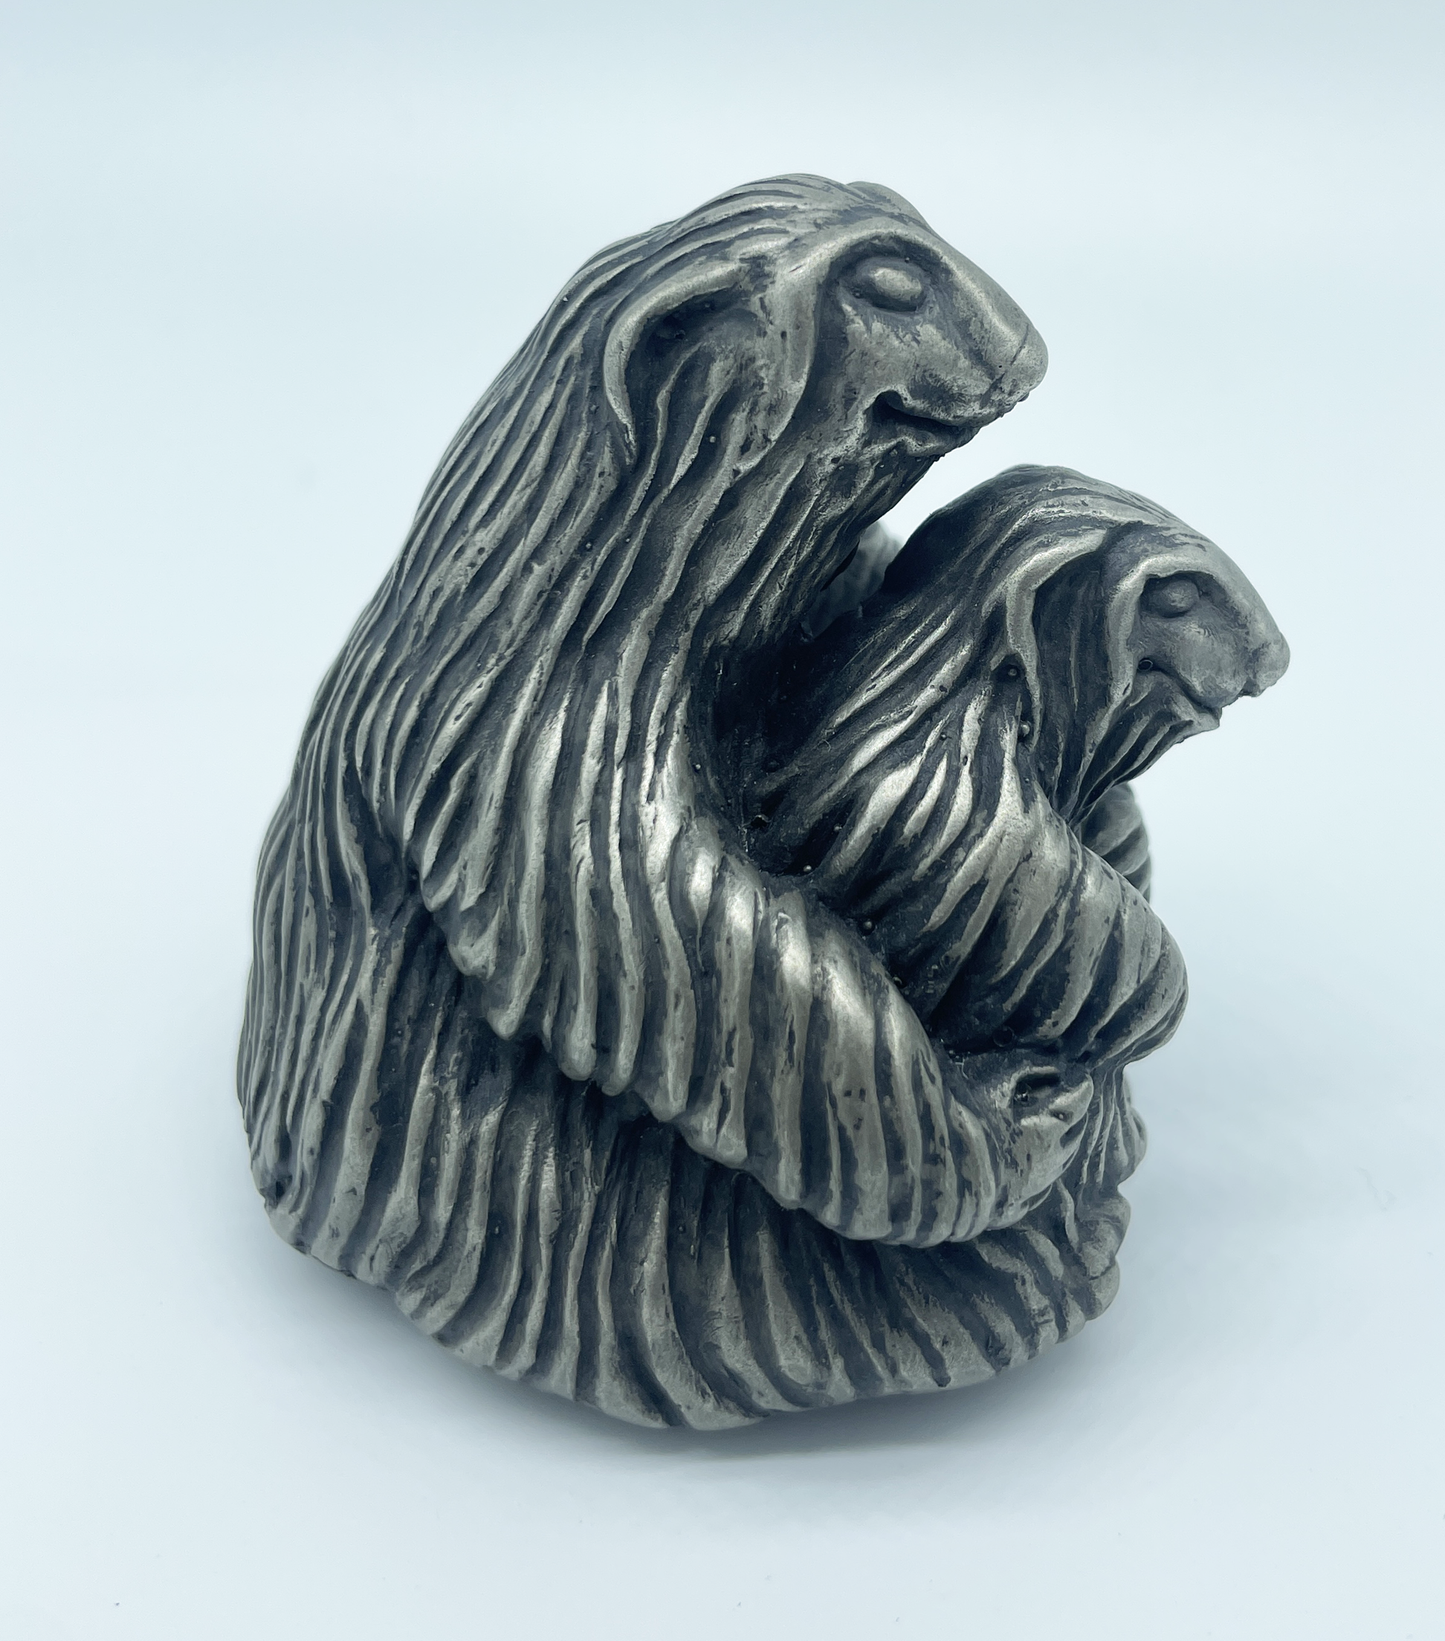 "Sloth Parent and Child" nickel metal coldcast #6/8 handmade, orig. design by Drew Medina (coming soon)